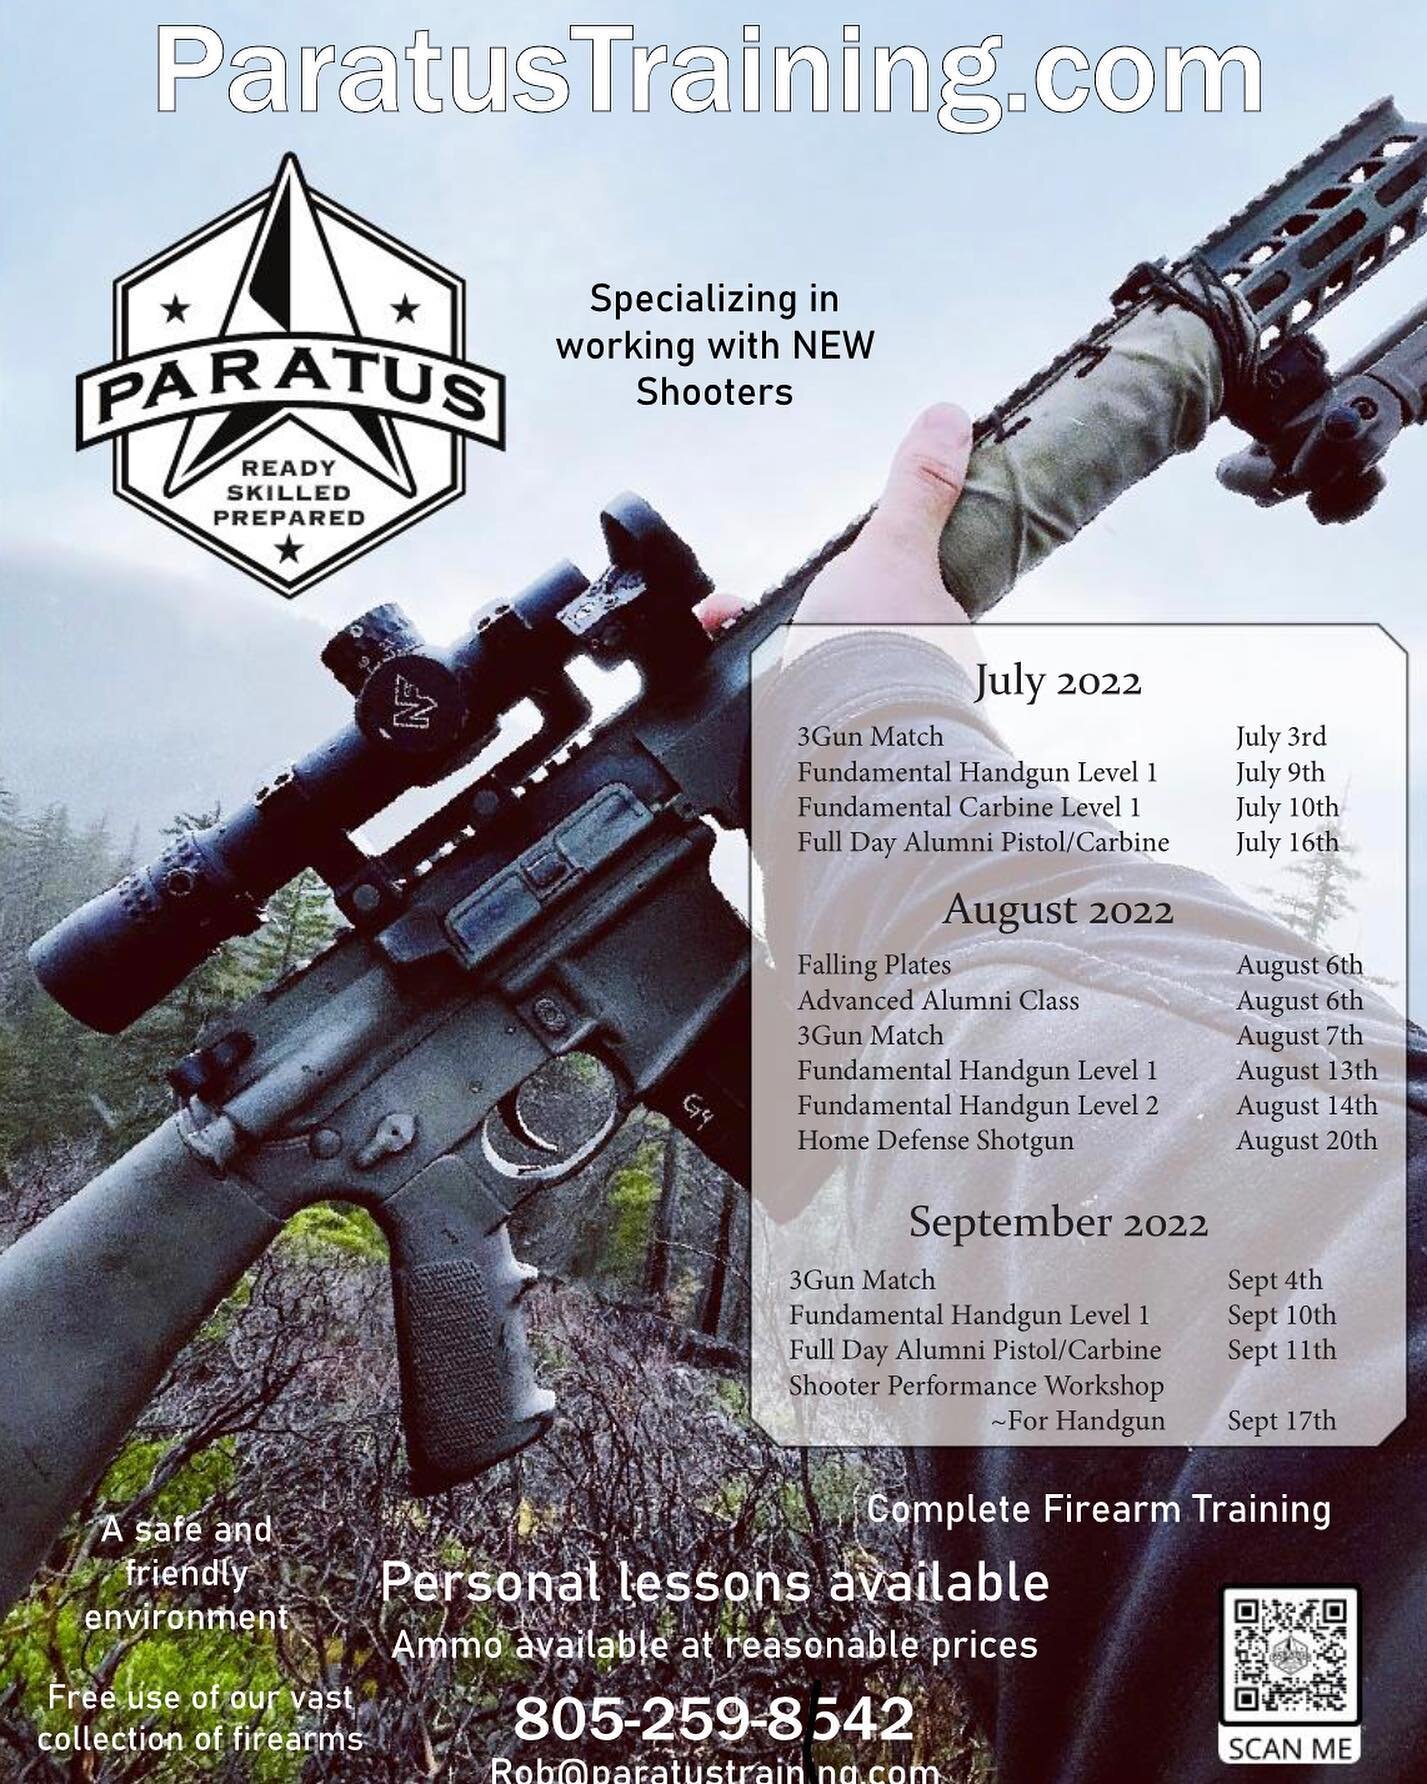 Our new summer flyer is out and we are kicking it off with pistol and carbine classes this month on the @wcgunclub 200 yard range.

Our fundamental classes on the 9th and 10th are on sale on the website Paratustraining.com so make sure to get your sp